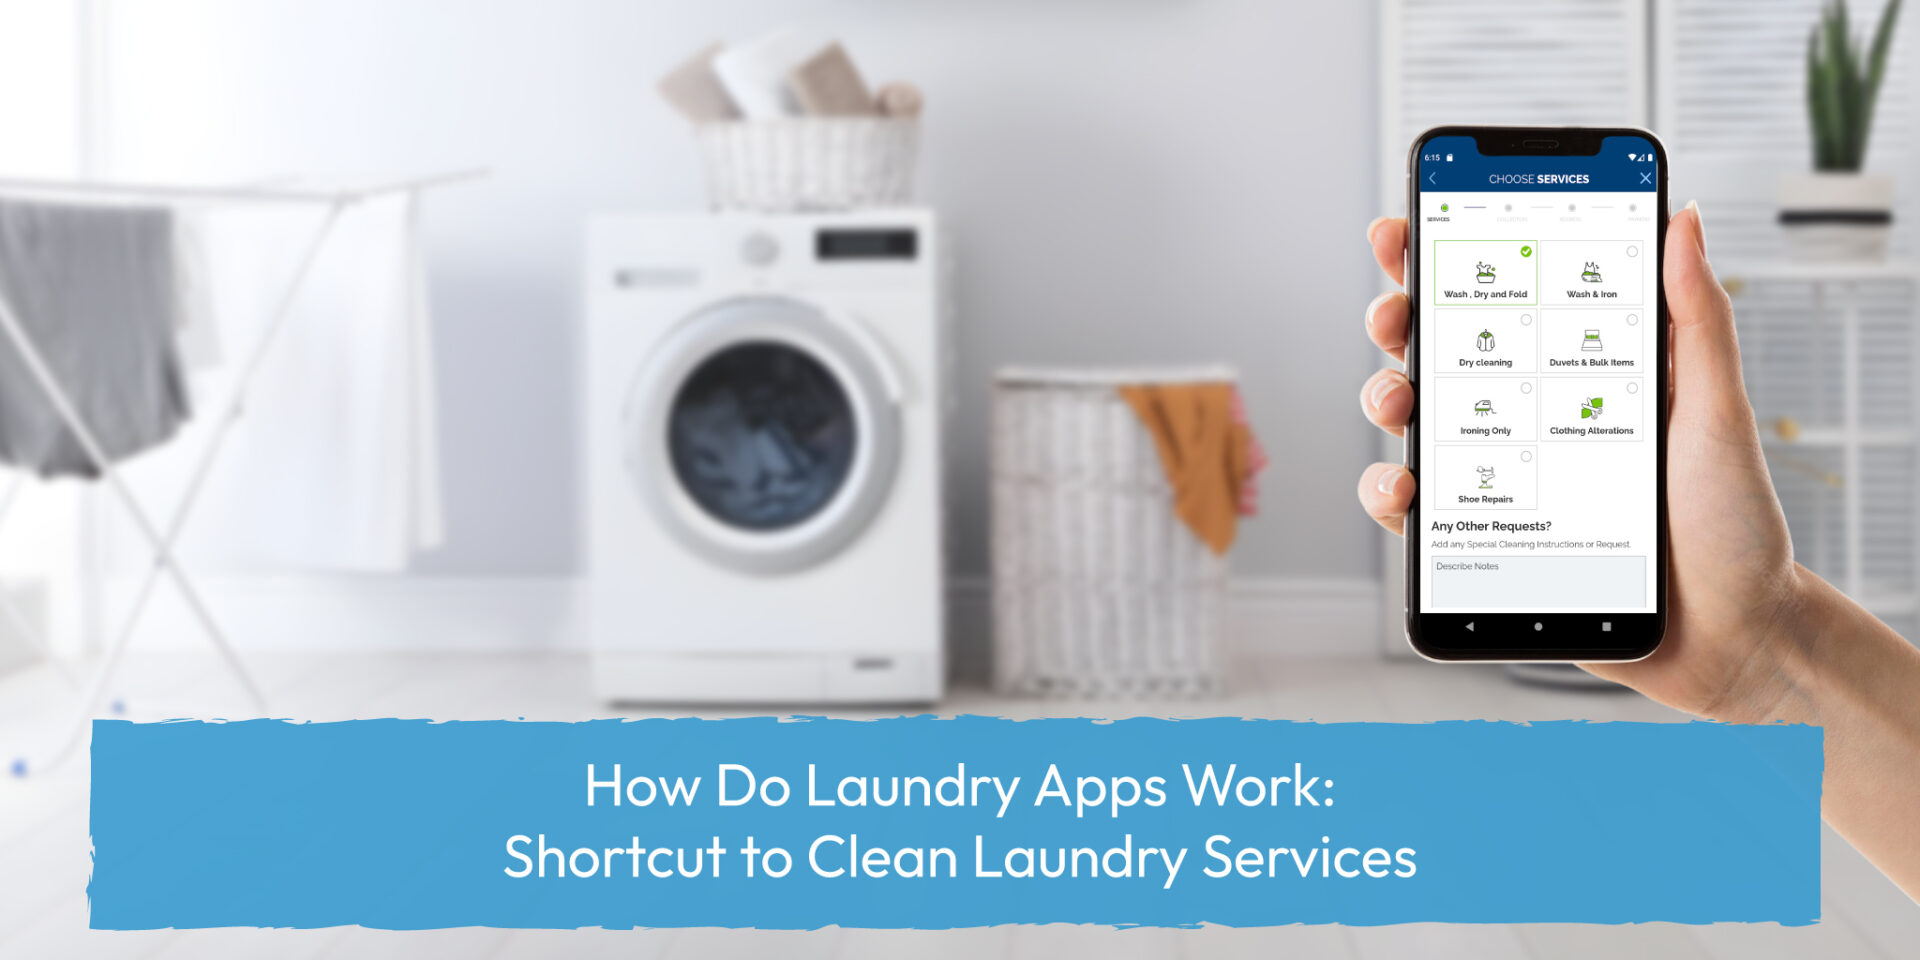 How Do Laundry Apps Work?